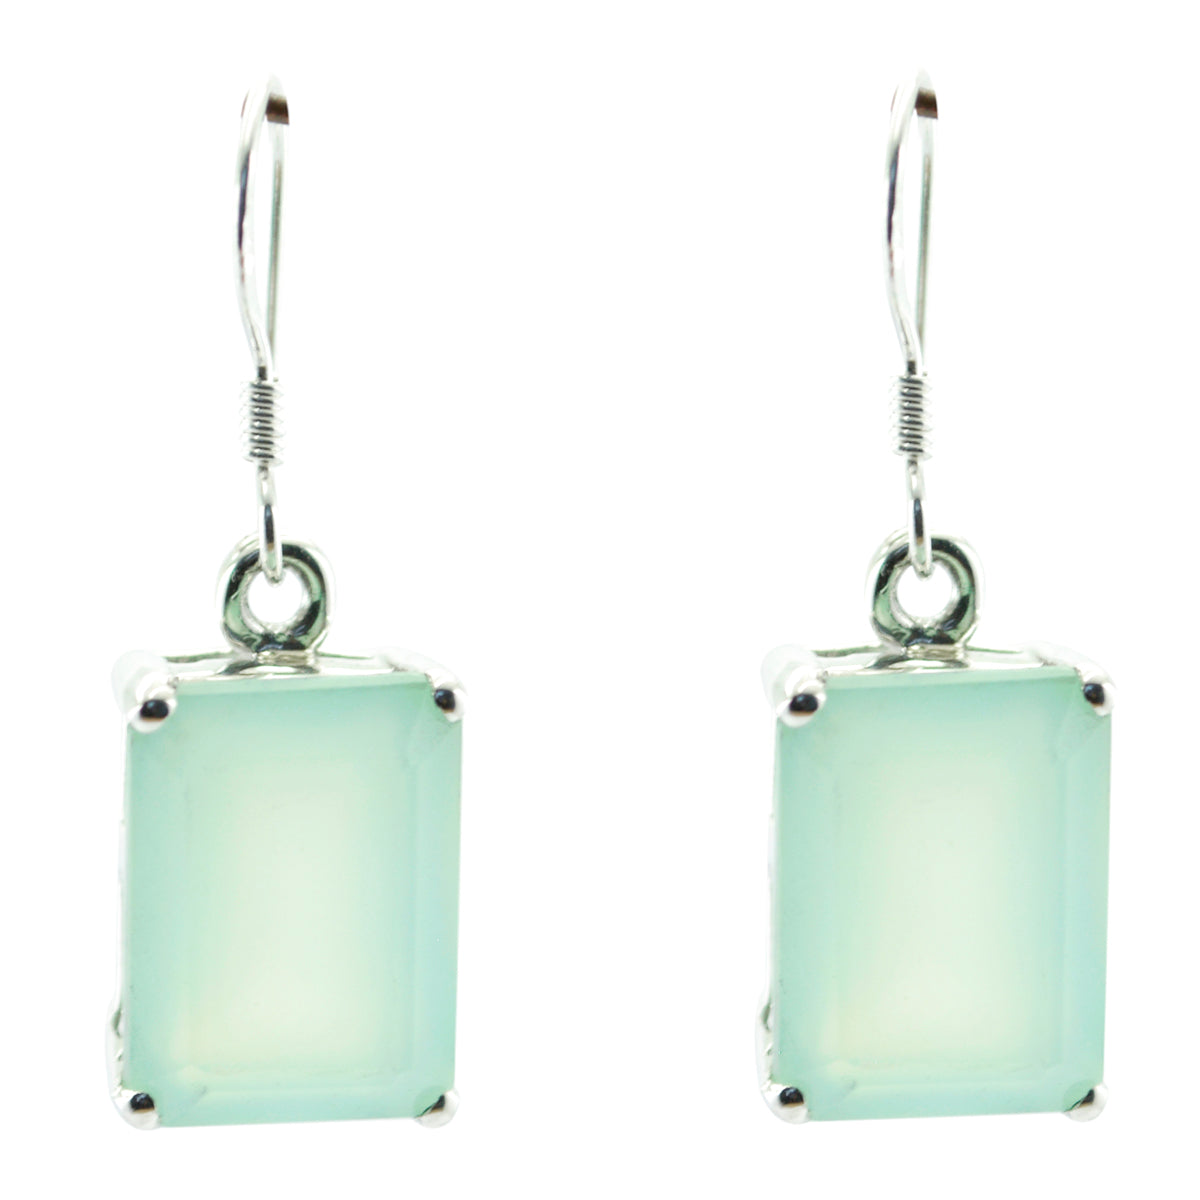 Riyo Real Gemstones Octogon Faceted Aqua Chalcedoy Silver Earrings gift for thanks giving